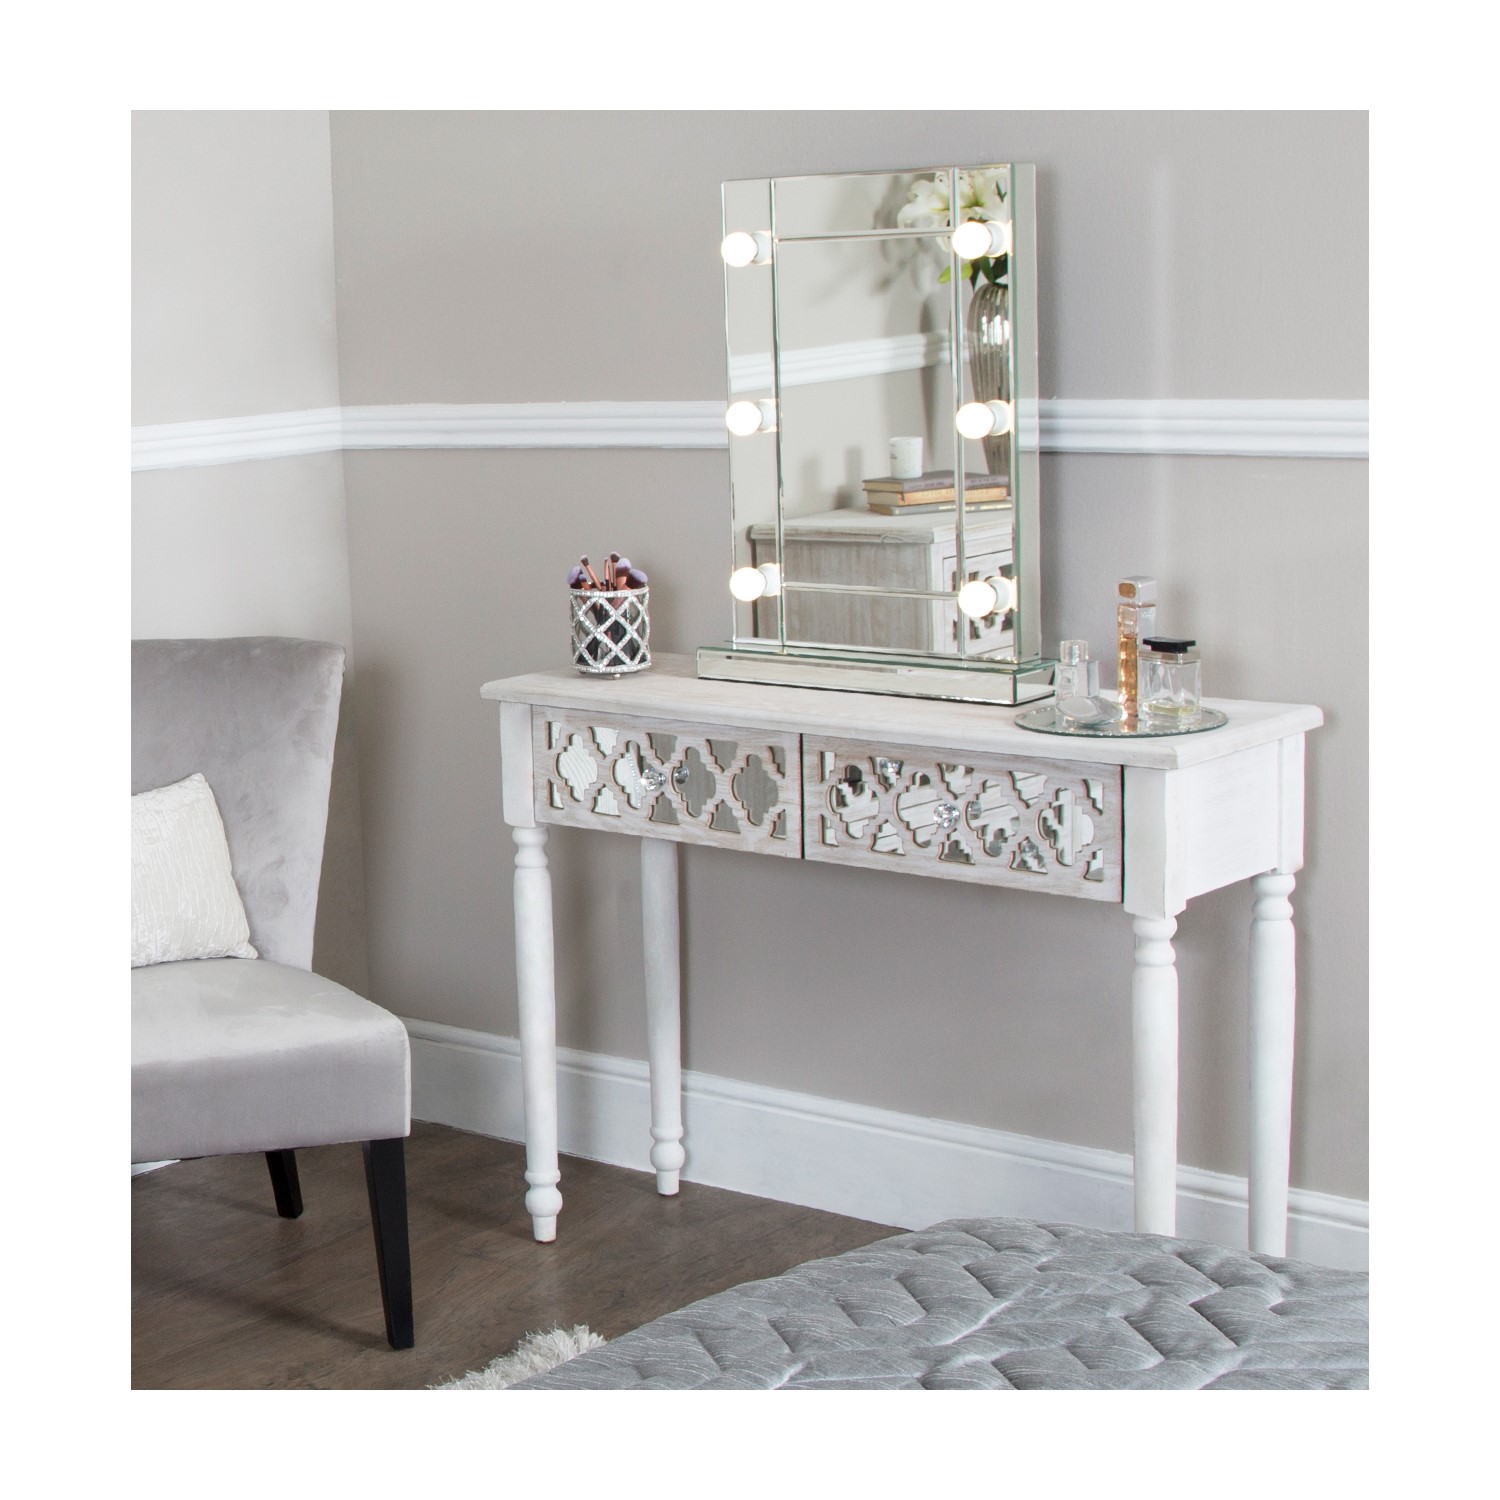 Read more about Aurora boutique miami beach mirrored wood ash 2 drawer console table